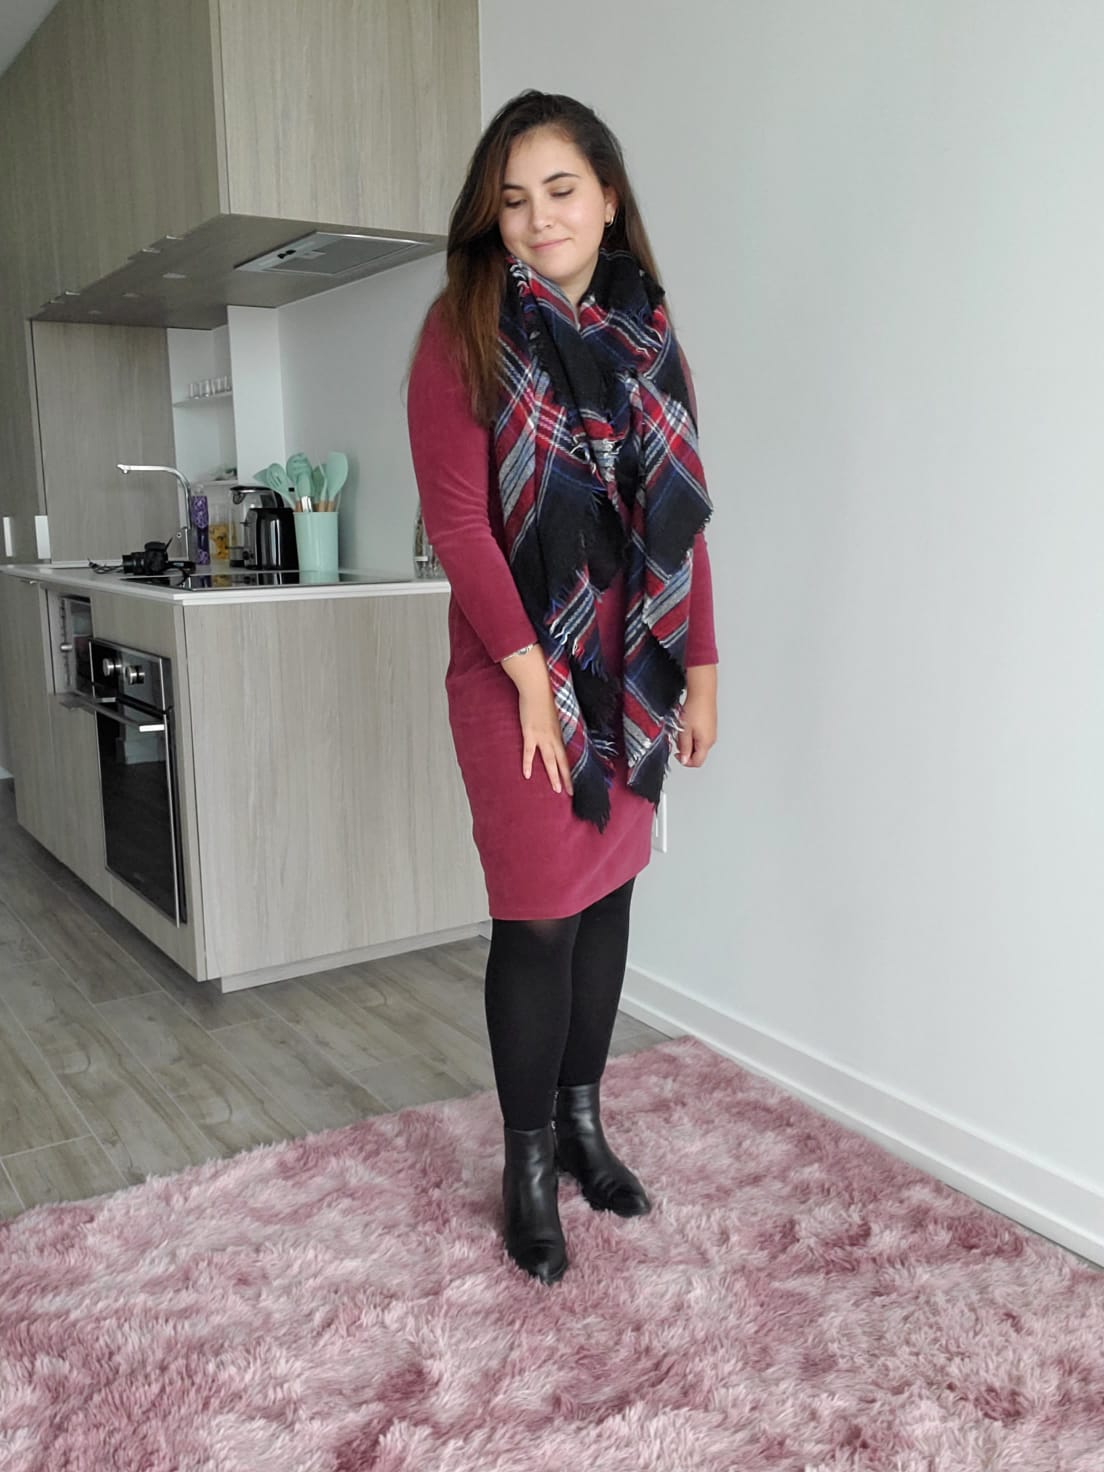 Modest Fall Outfit Ideas - Fall and Winter - Traditional Catholic and Christian Modesty - Red Dress from Old Navy with Plaid Scarf and Black Tights and Black Boots